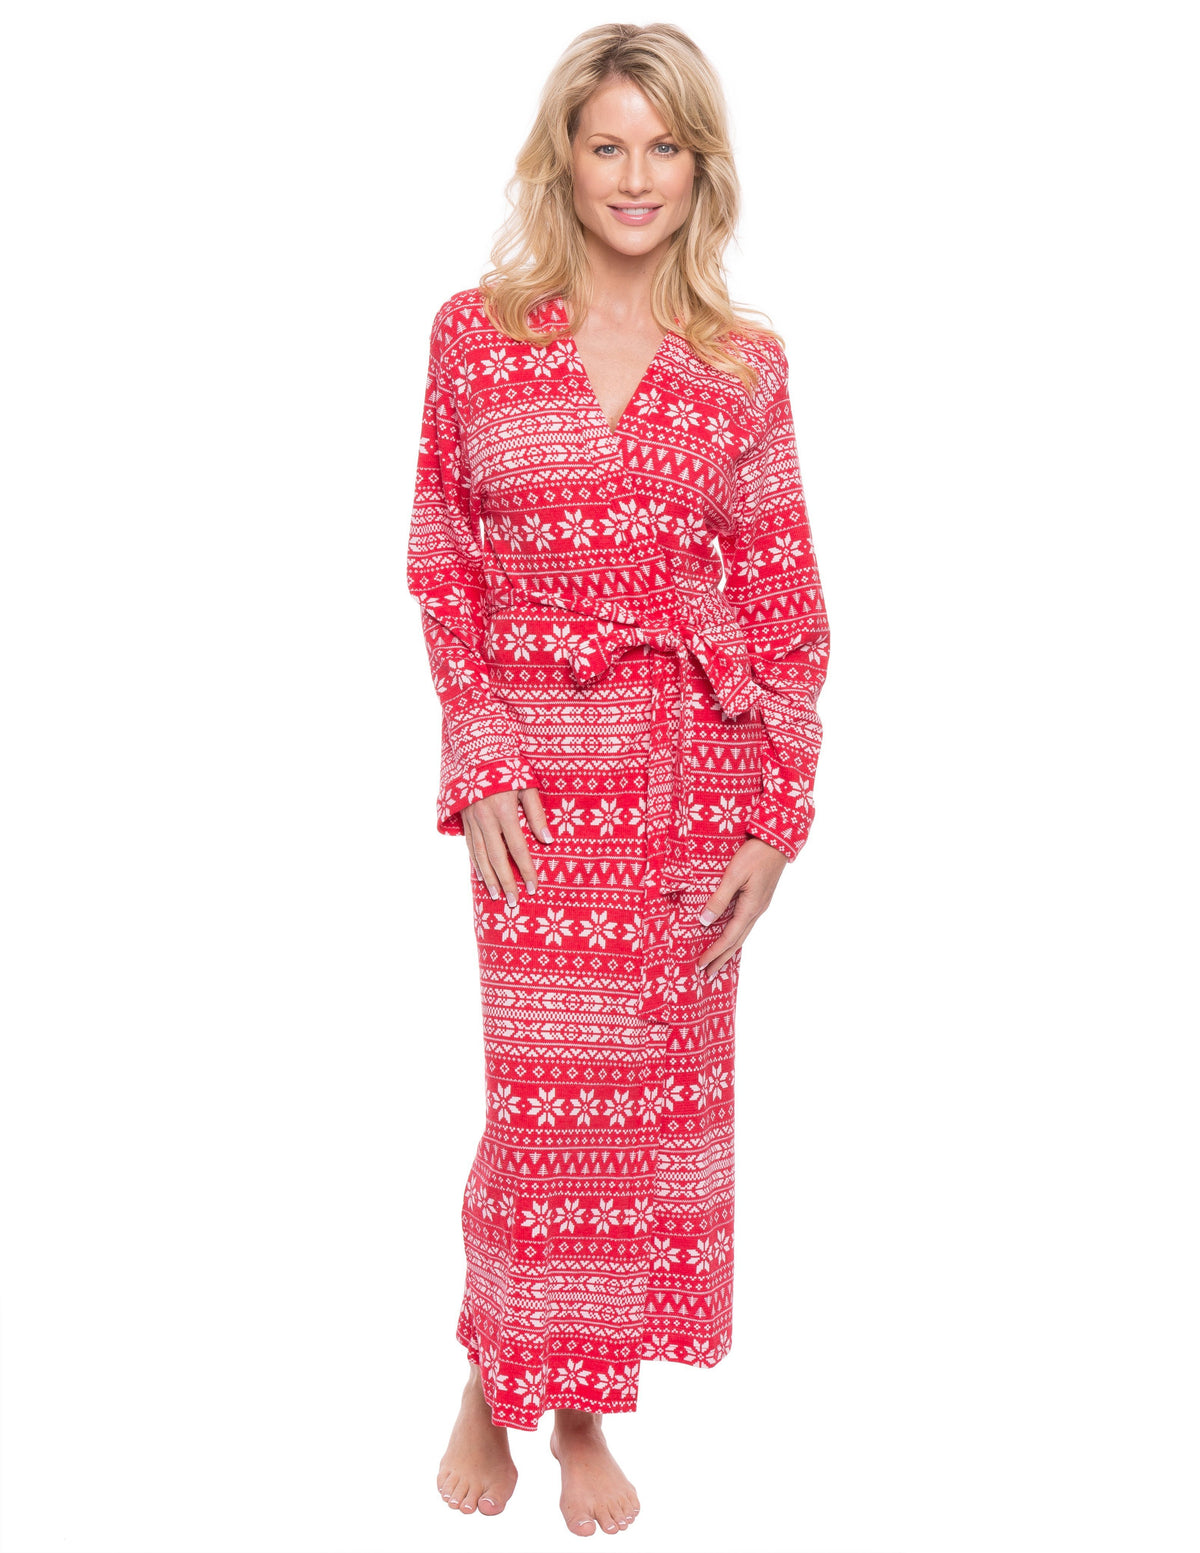 Women's Waffle Knit Thermal Robe - Fair Isle Red/White